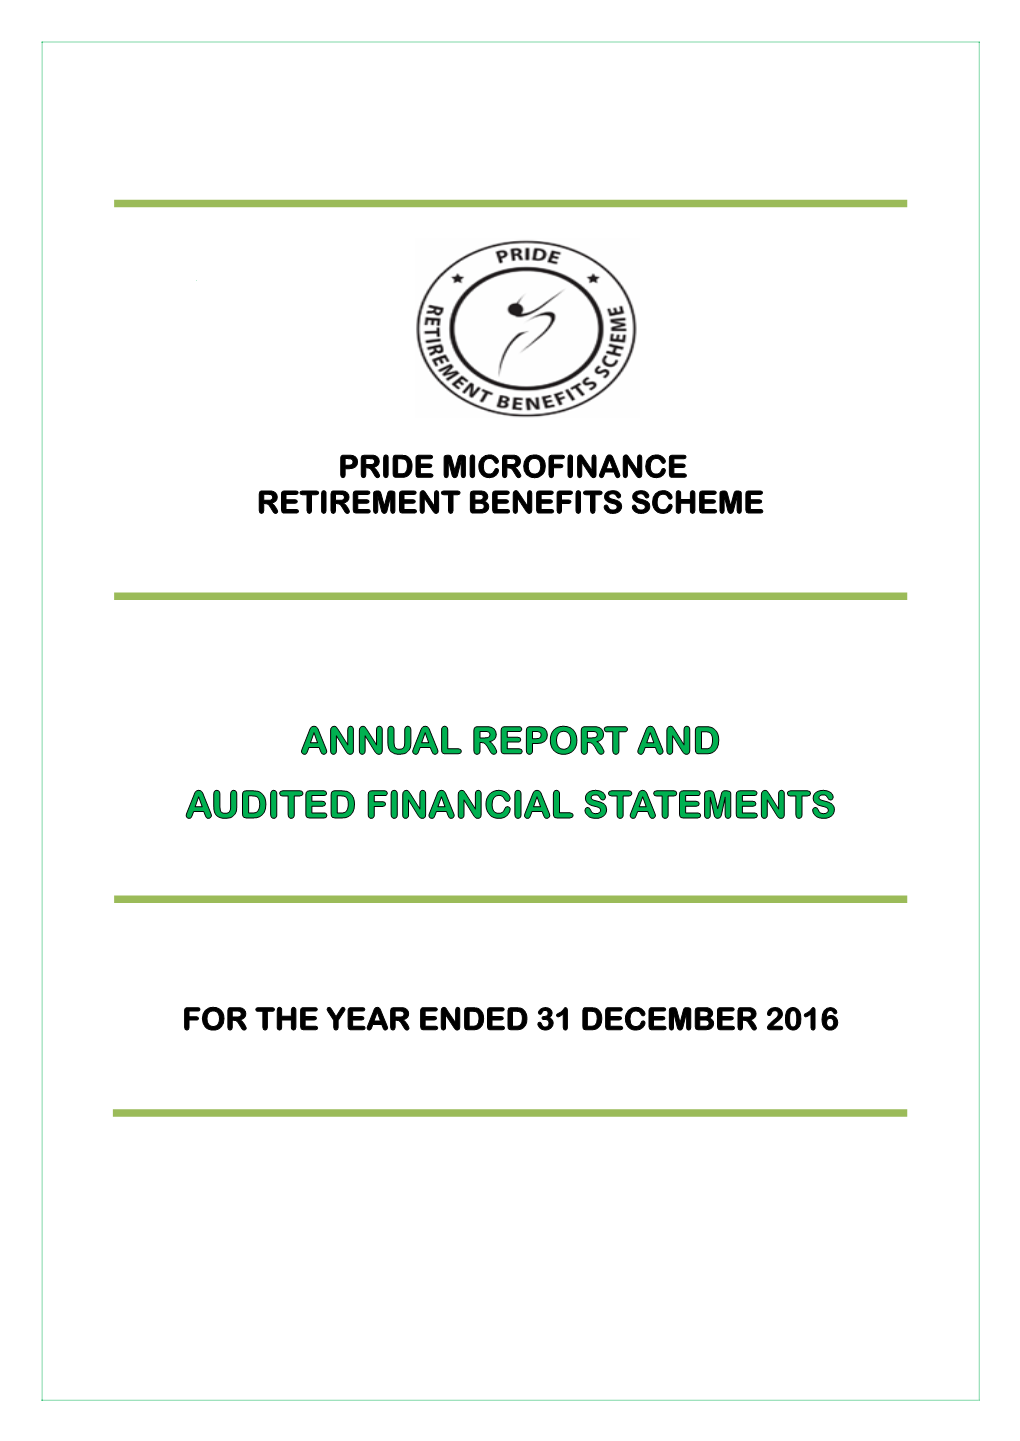 Pride Microfinance Retirement Benefits Scheme Annual Report and Audited Financial Statements for the Year Ended 31 December 2016